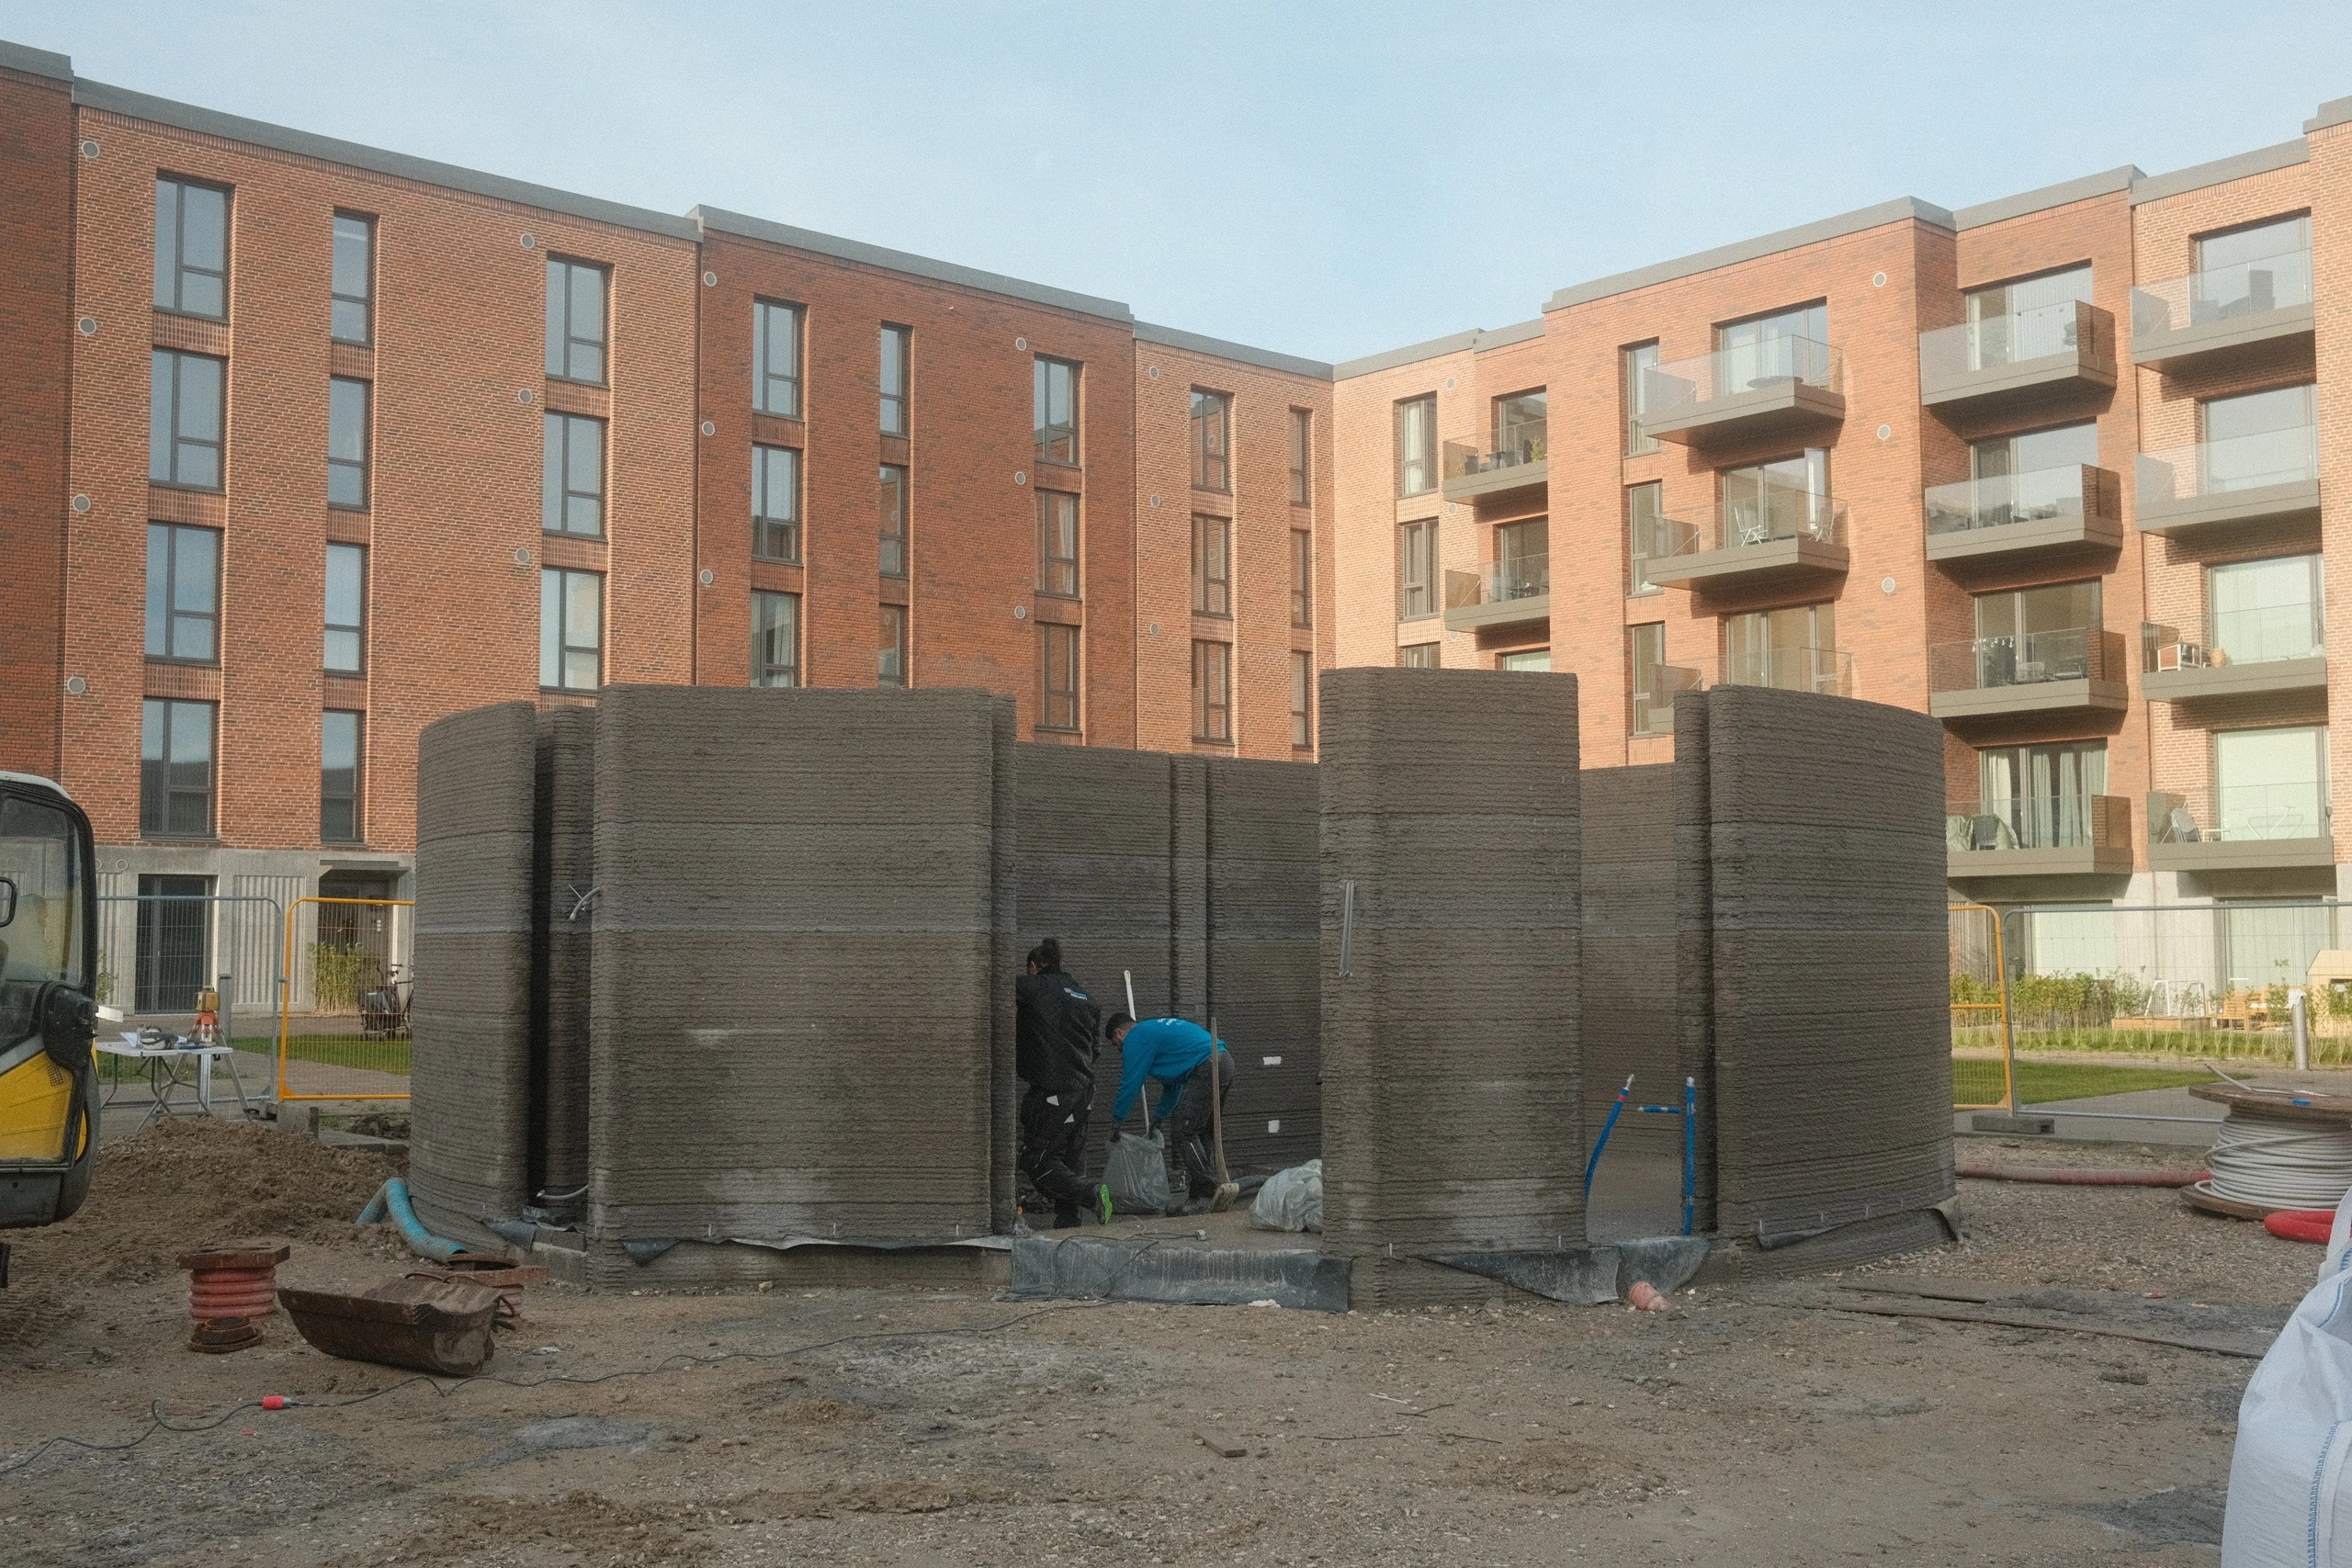 Image of the 3D-printed Community House under construction